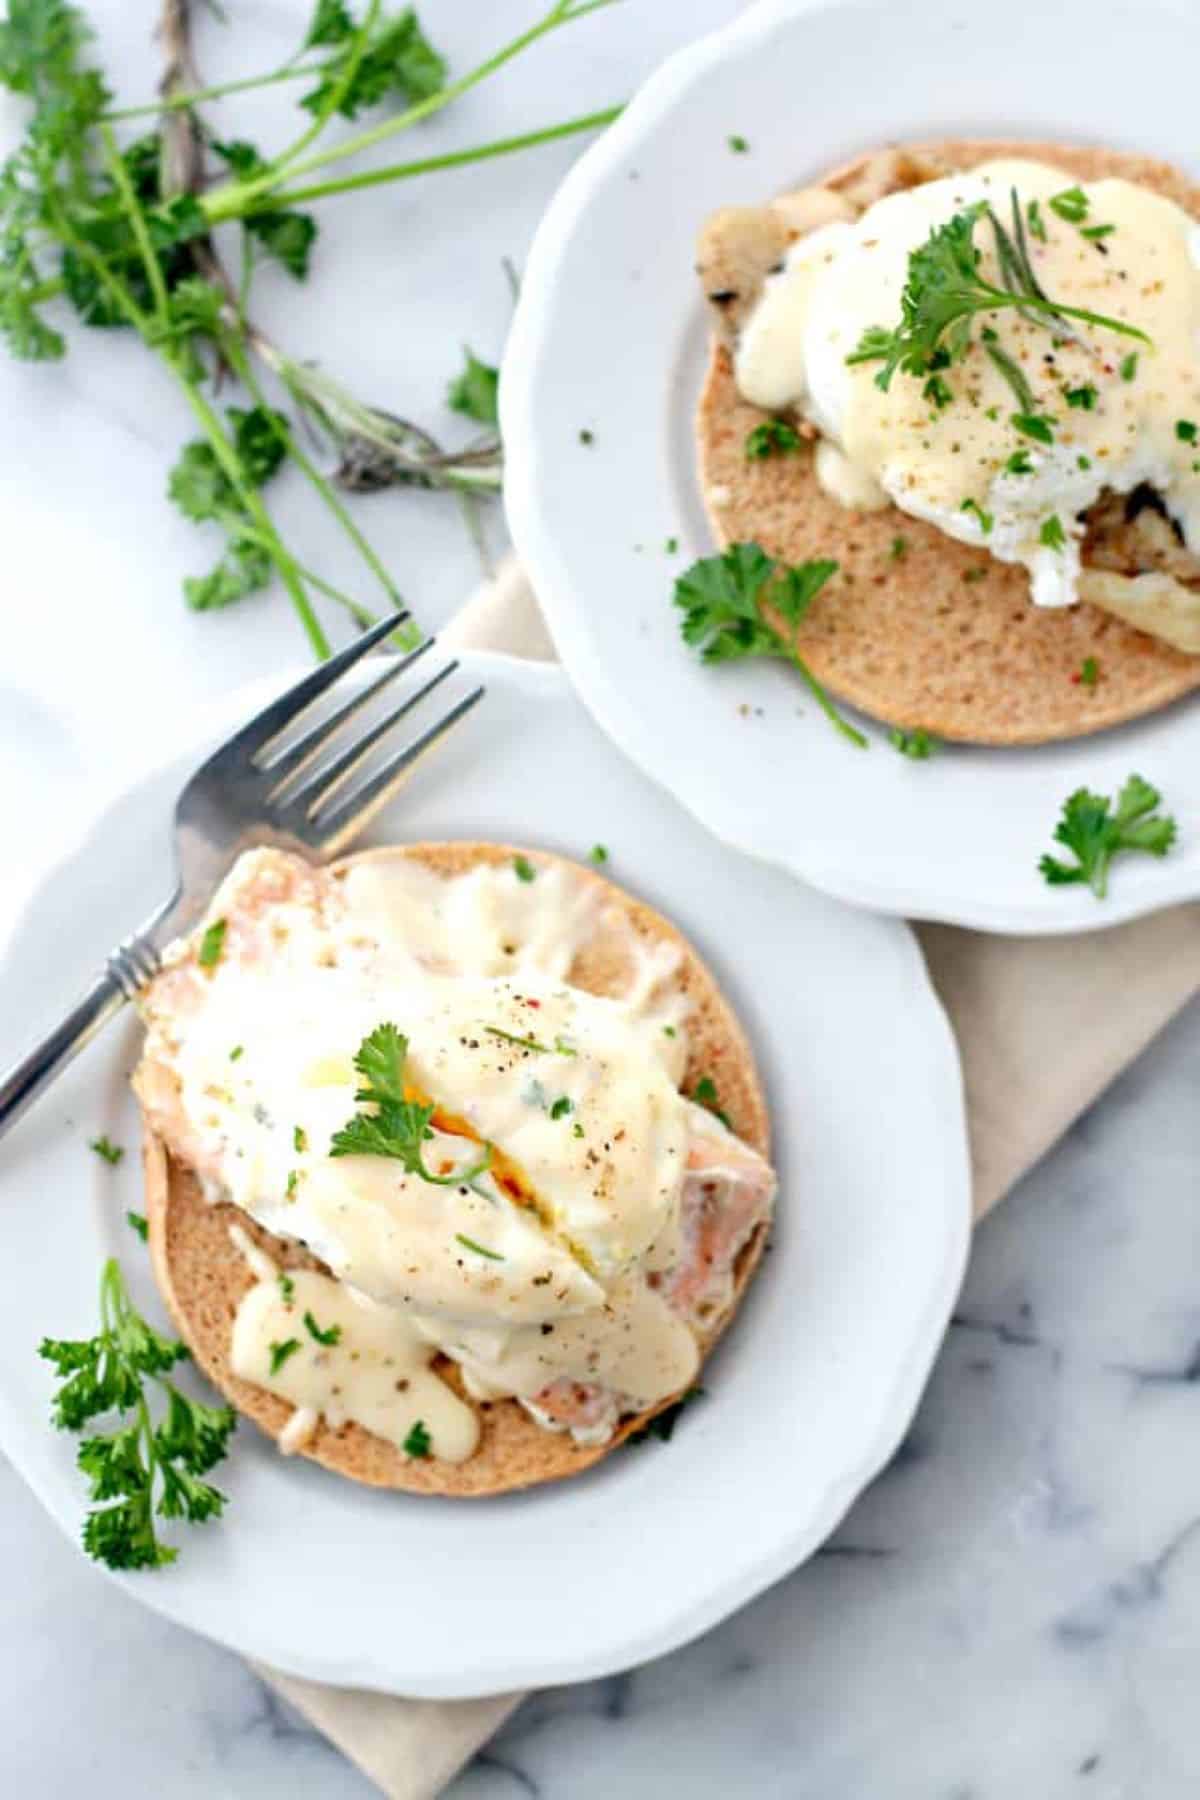 Two servings of poached-egg salmon with cheese sauce on white plates, garnished with parsley.